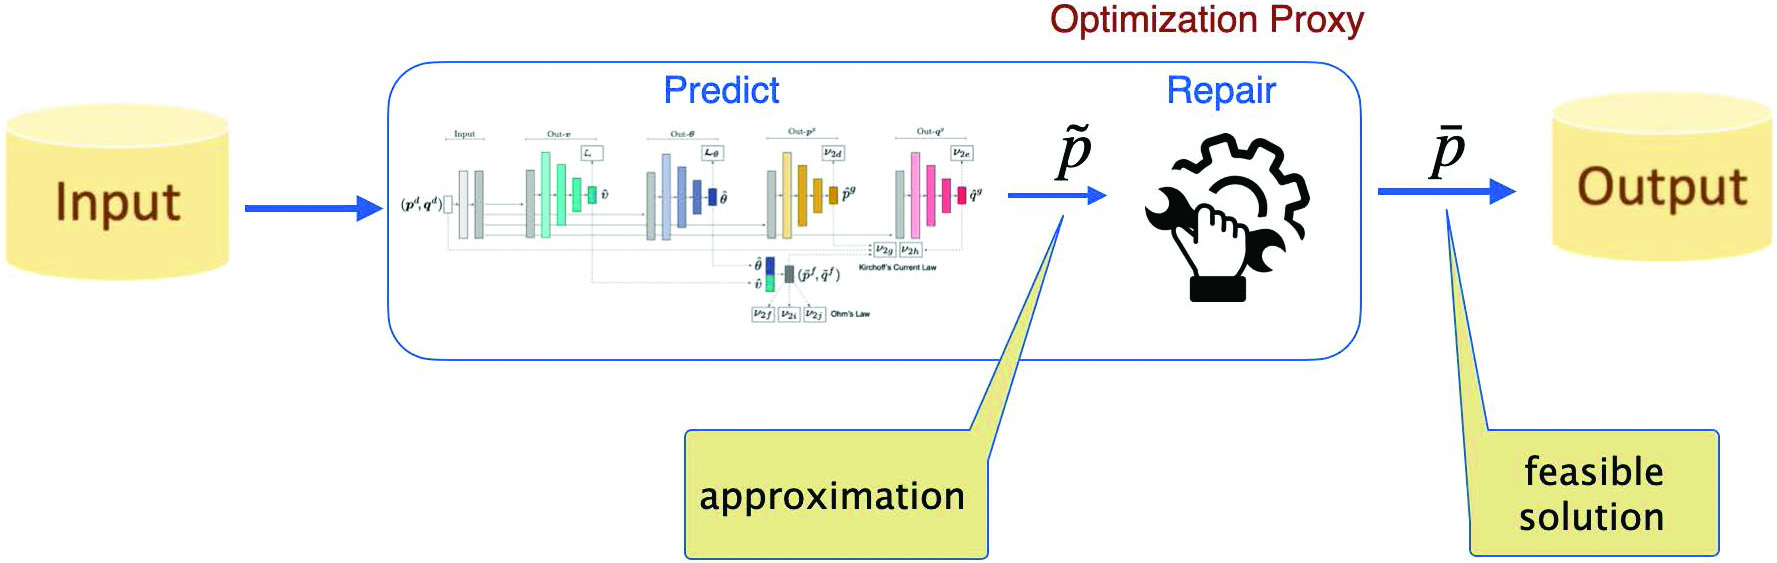 &lt;strong&gt;Figure 1.&lt;/strong&gt; A high-level outline of the architecture of optimization proxies. Figure courtesy of the author.